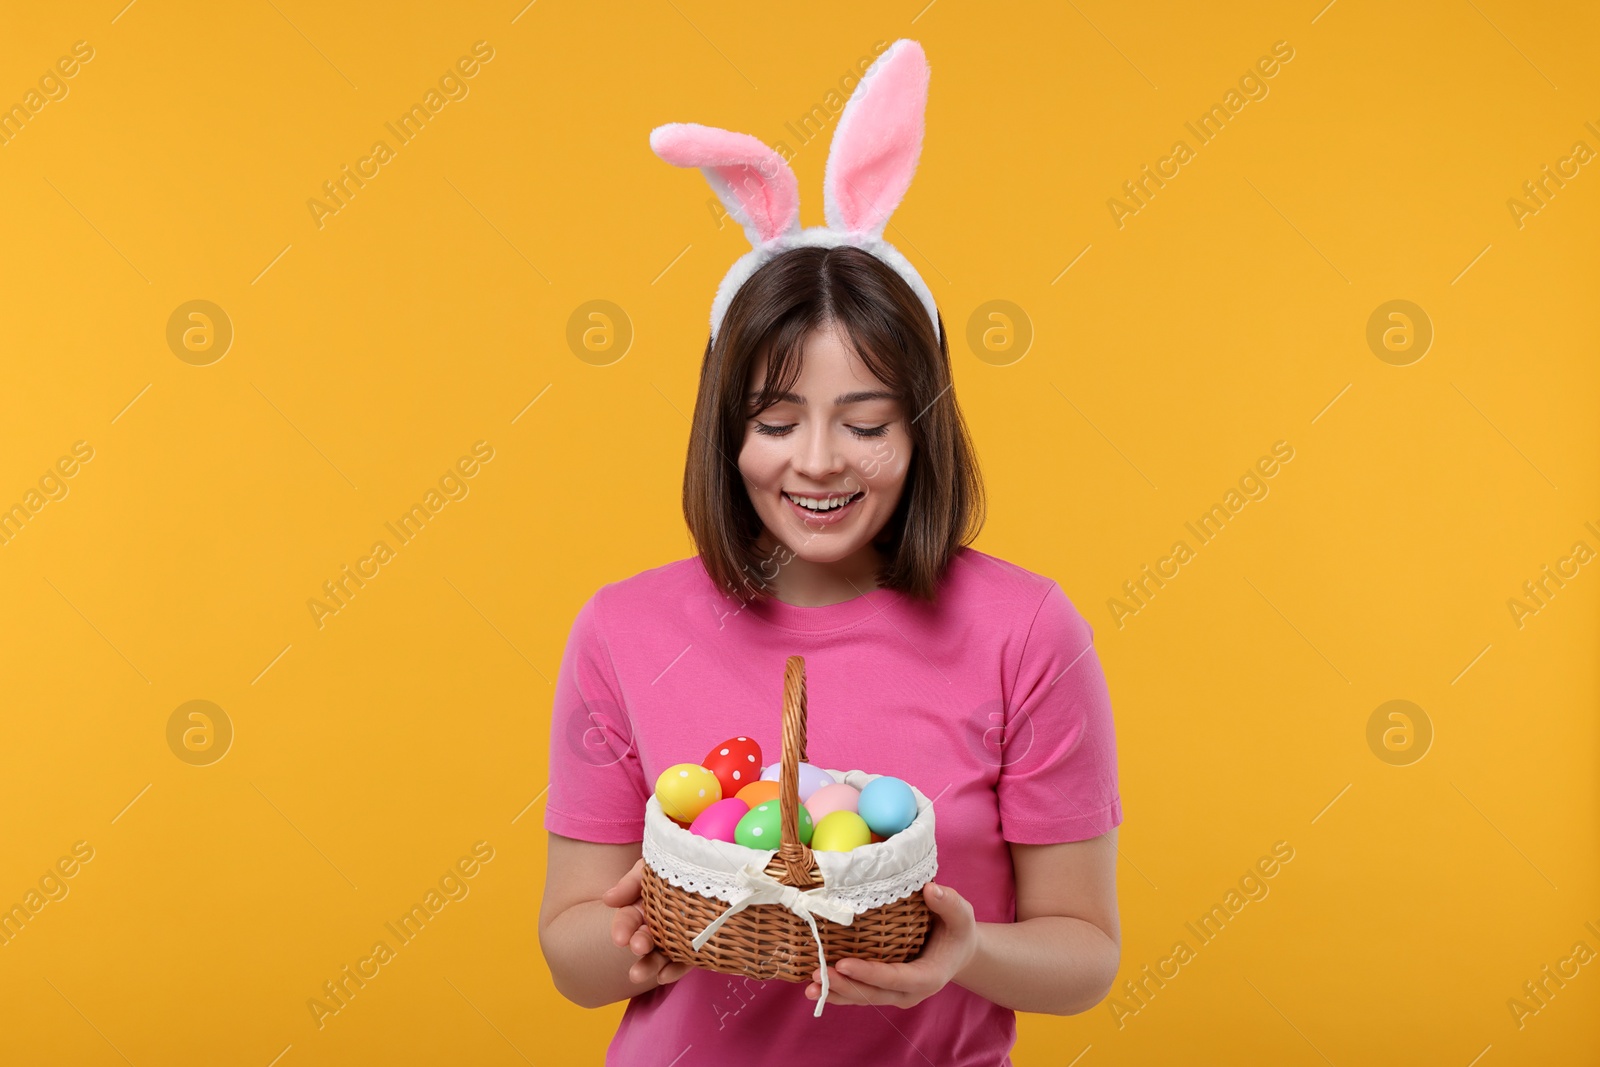 Photo of Easter celebration. Happy woman with bunny ears and wicker basket full of painted eggs on orange background